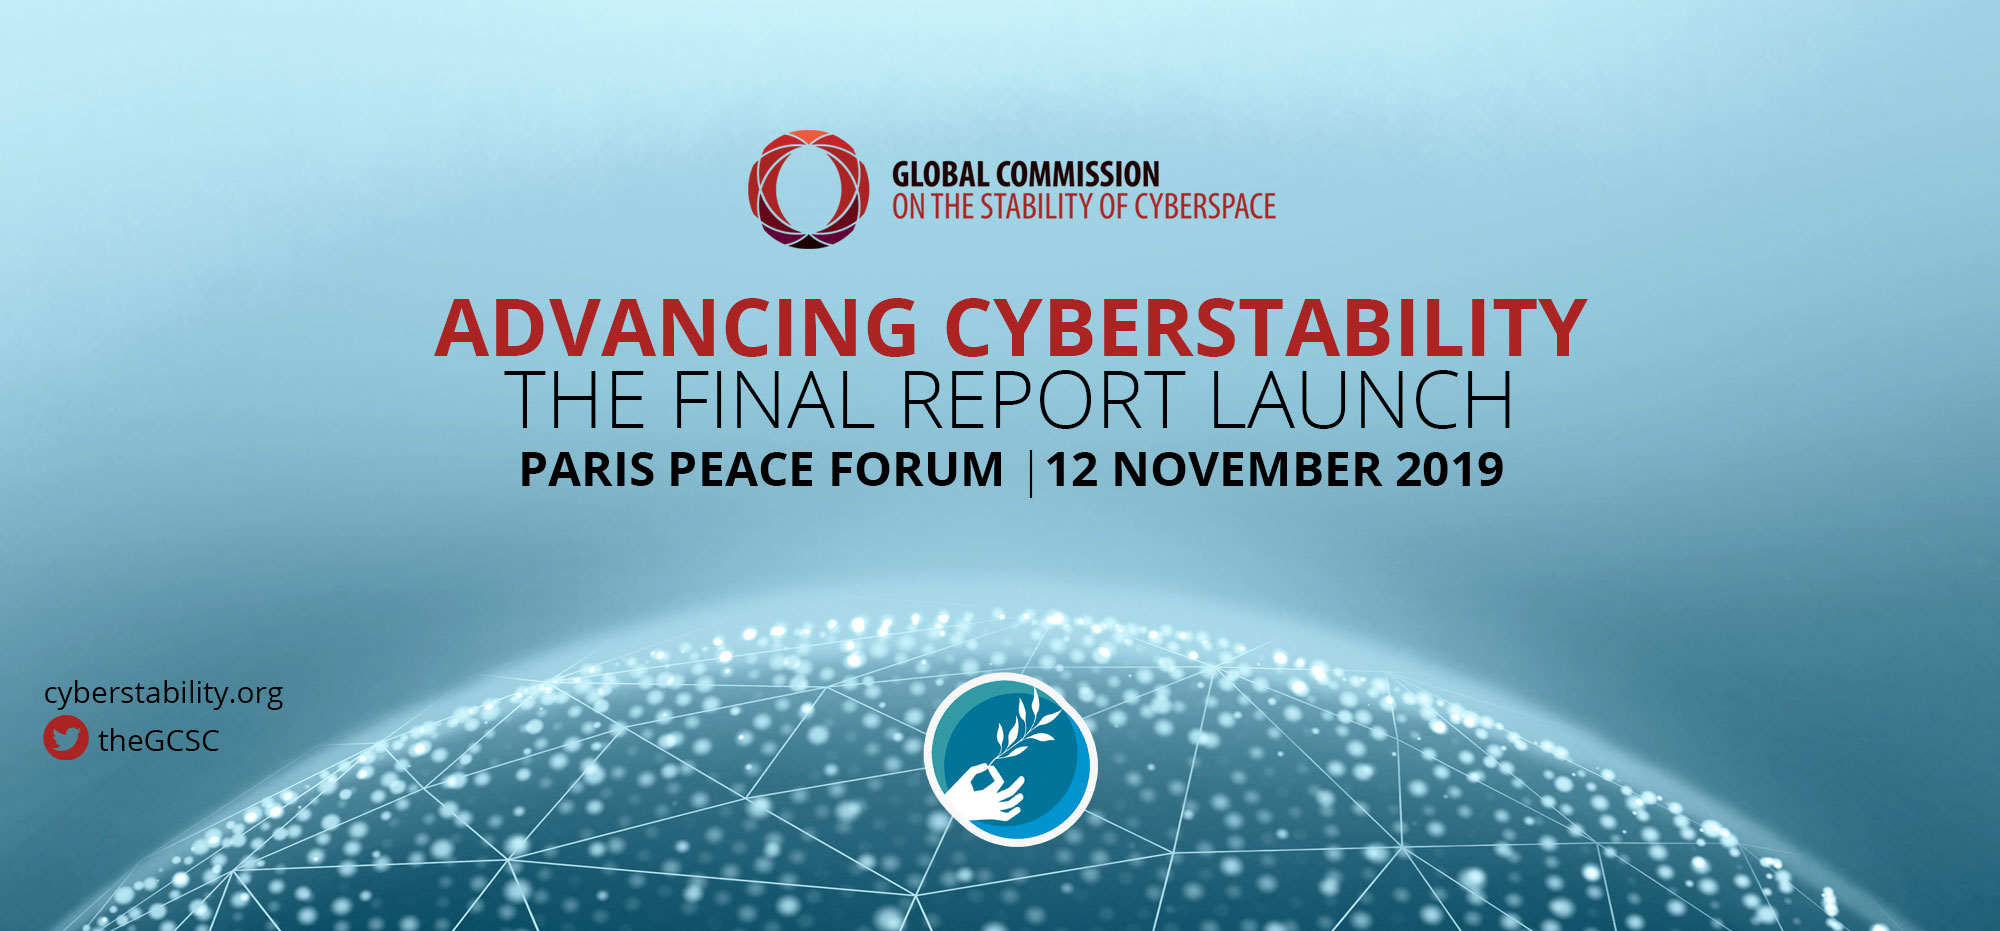 A Call to Action on Advancing Cyberstability: Global
                  Commission Launches Final Report